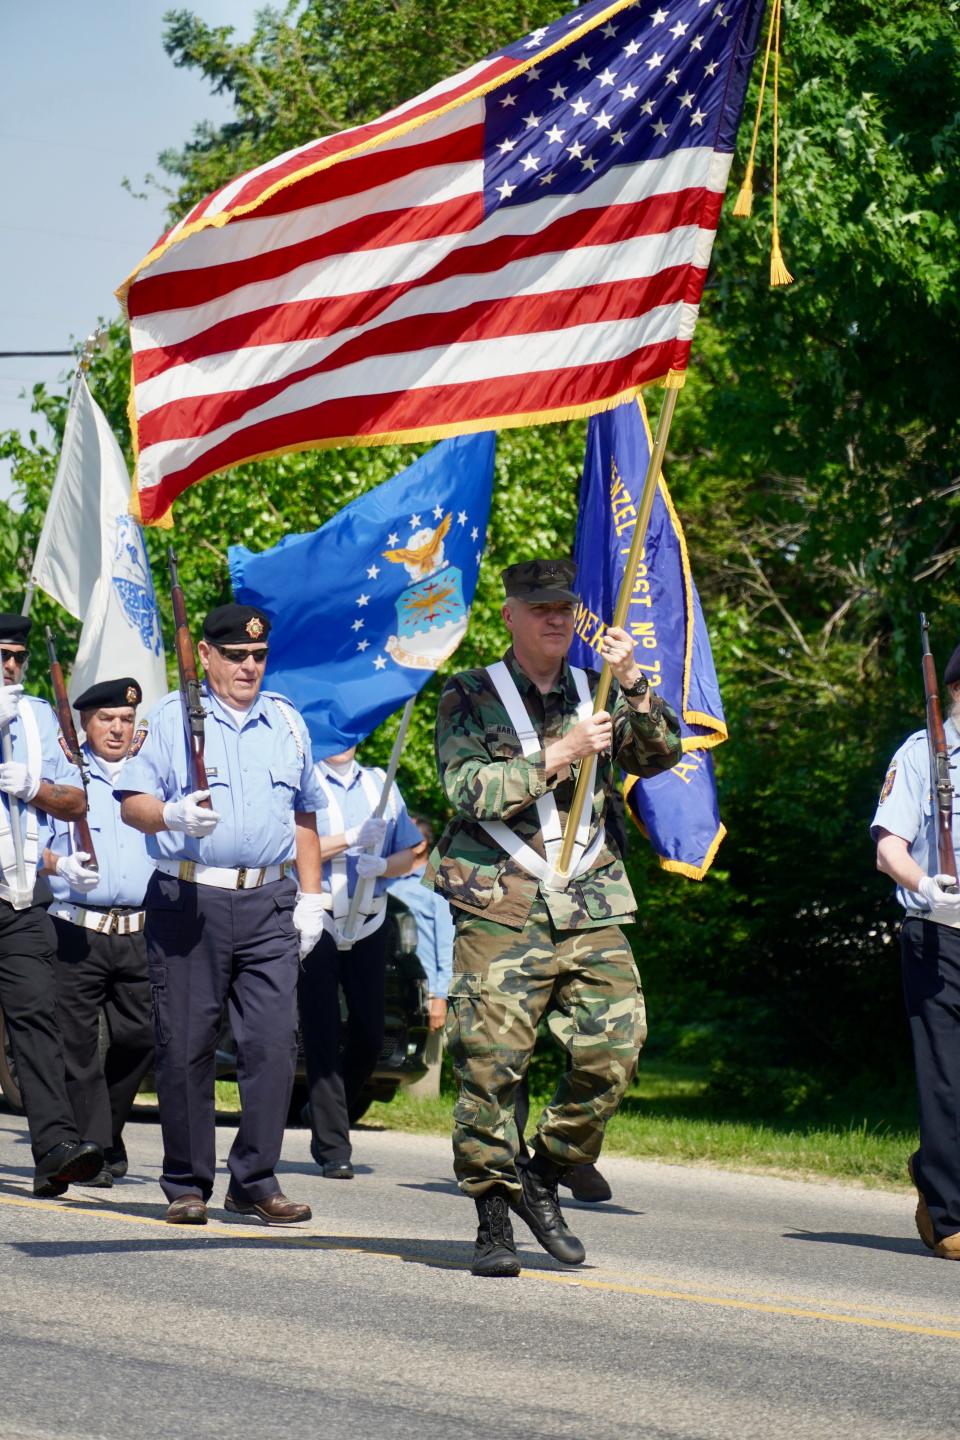 Members of Sturgis American Legion and VFW led Monday's Memorial Day parade in Sturgis.